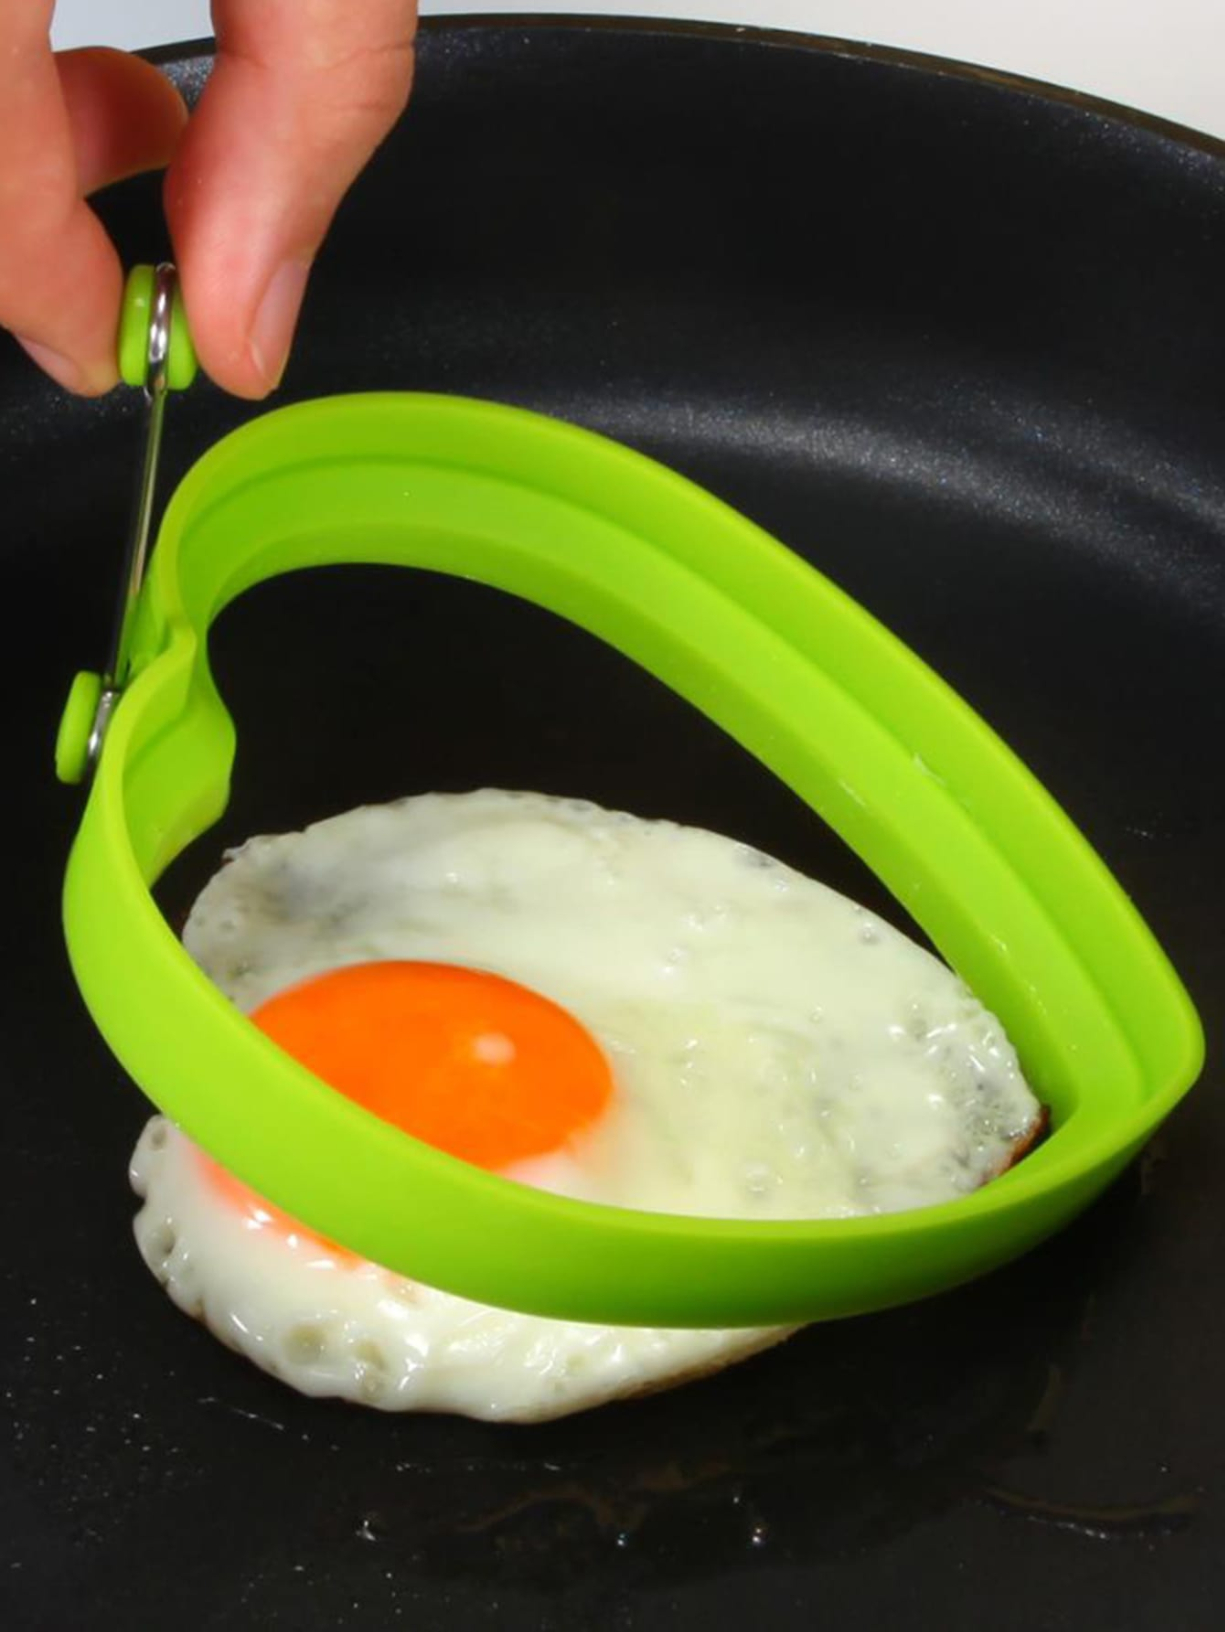 Silicone Egg Rings Heart-shaped - Non Stick Fried Egg Mold